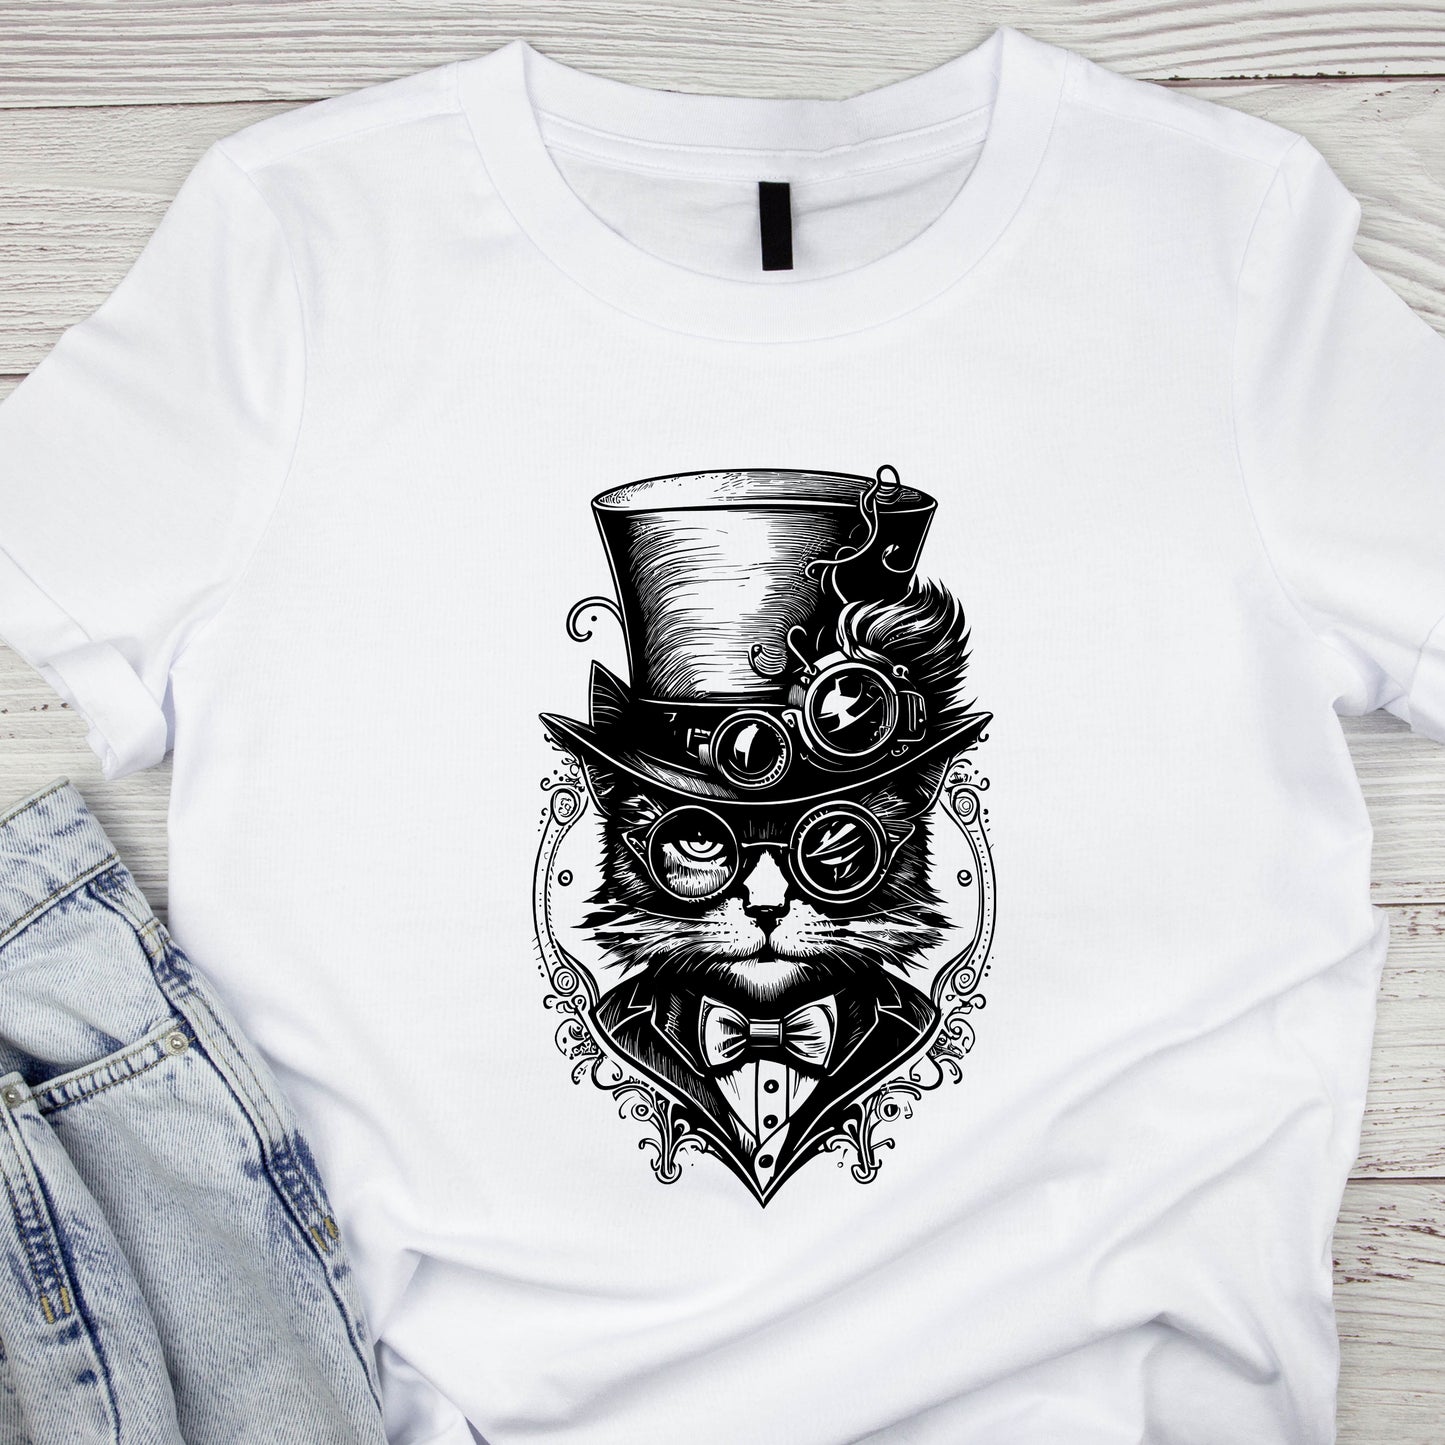 Steampunk T-Shirt For Tom Cat Shirt For Retro TShirt For Victorian T Shirt For Wild West T Shirt For Science Fiction Gift